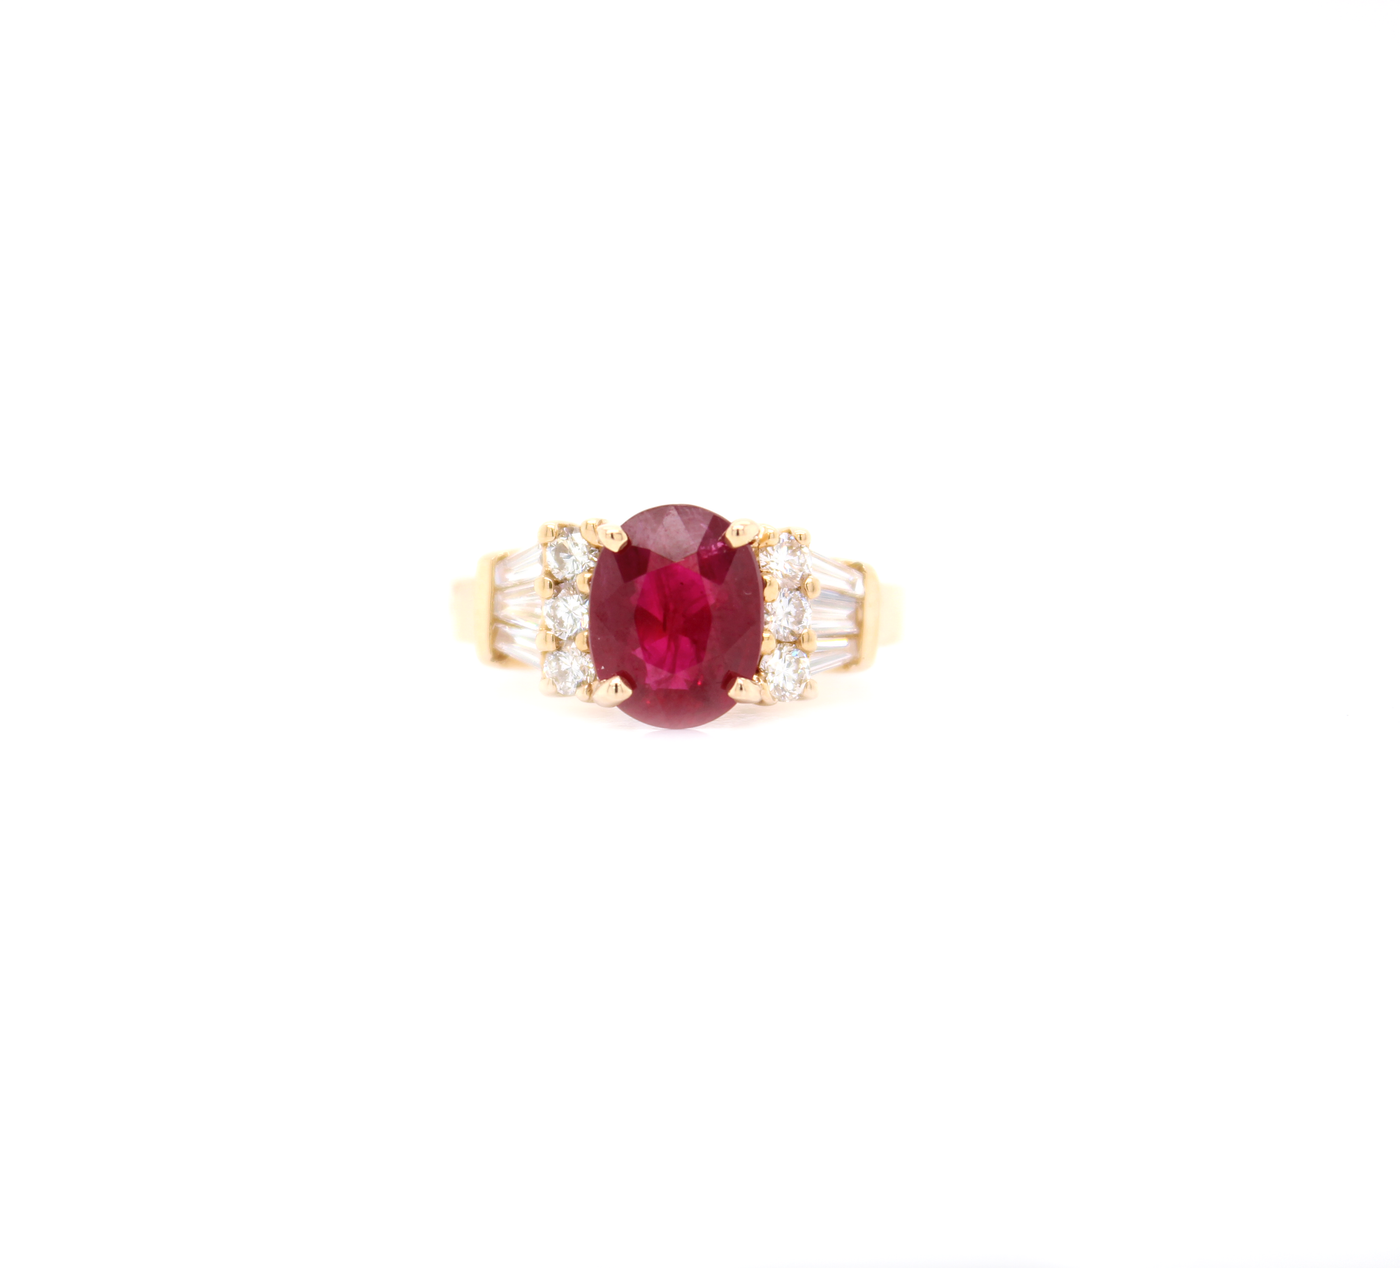 2.50ct Oval Cut Ruby and Diamond Ring